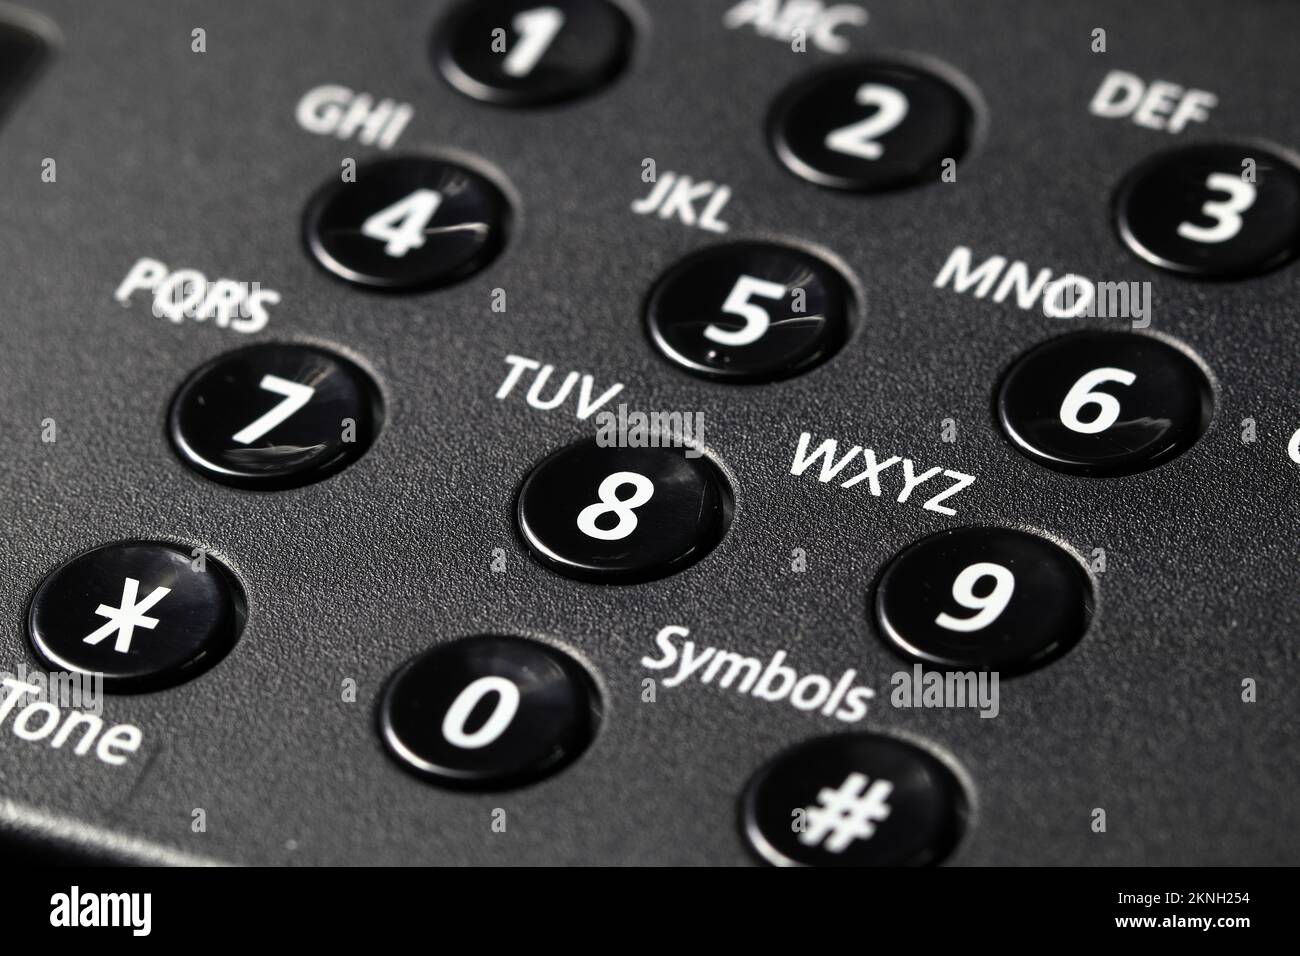 close up telephone or facsimile or fax keypad with rectangular buttons. Stock Photo